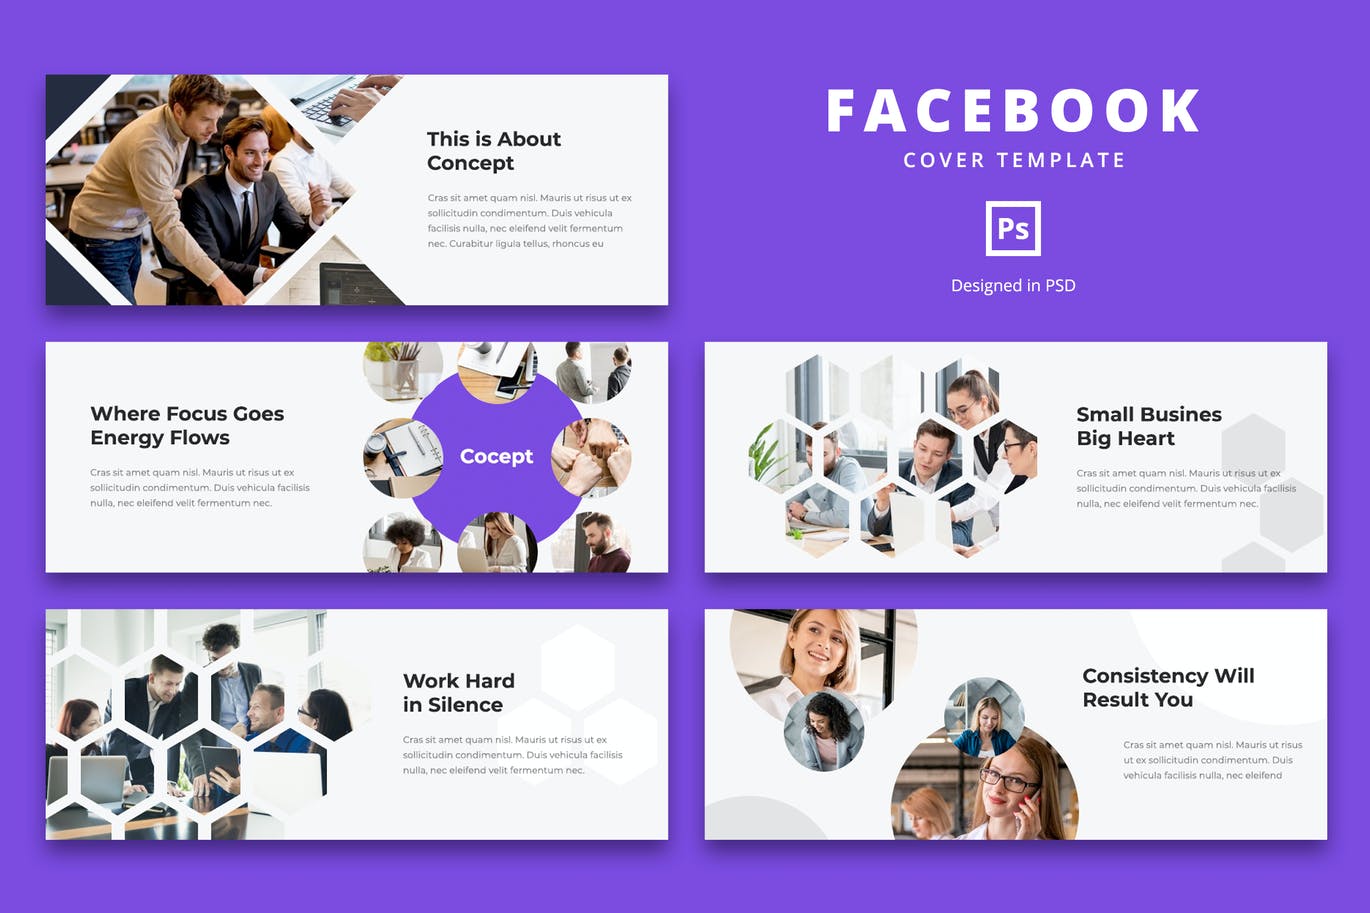 Facebook Cover Template Business